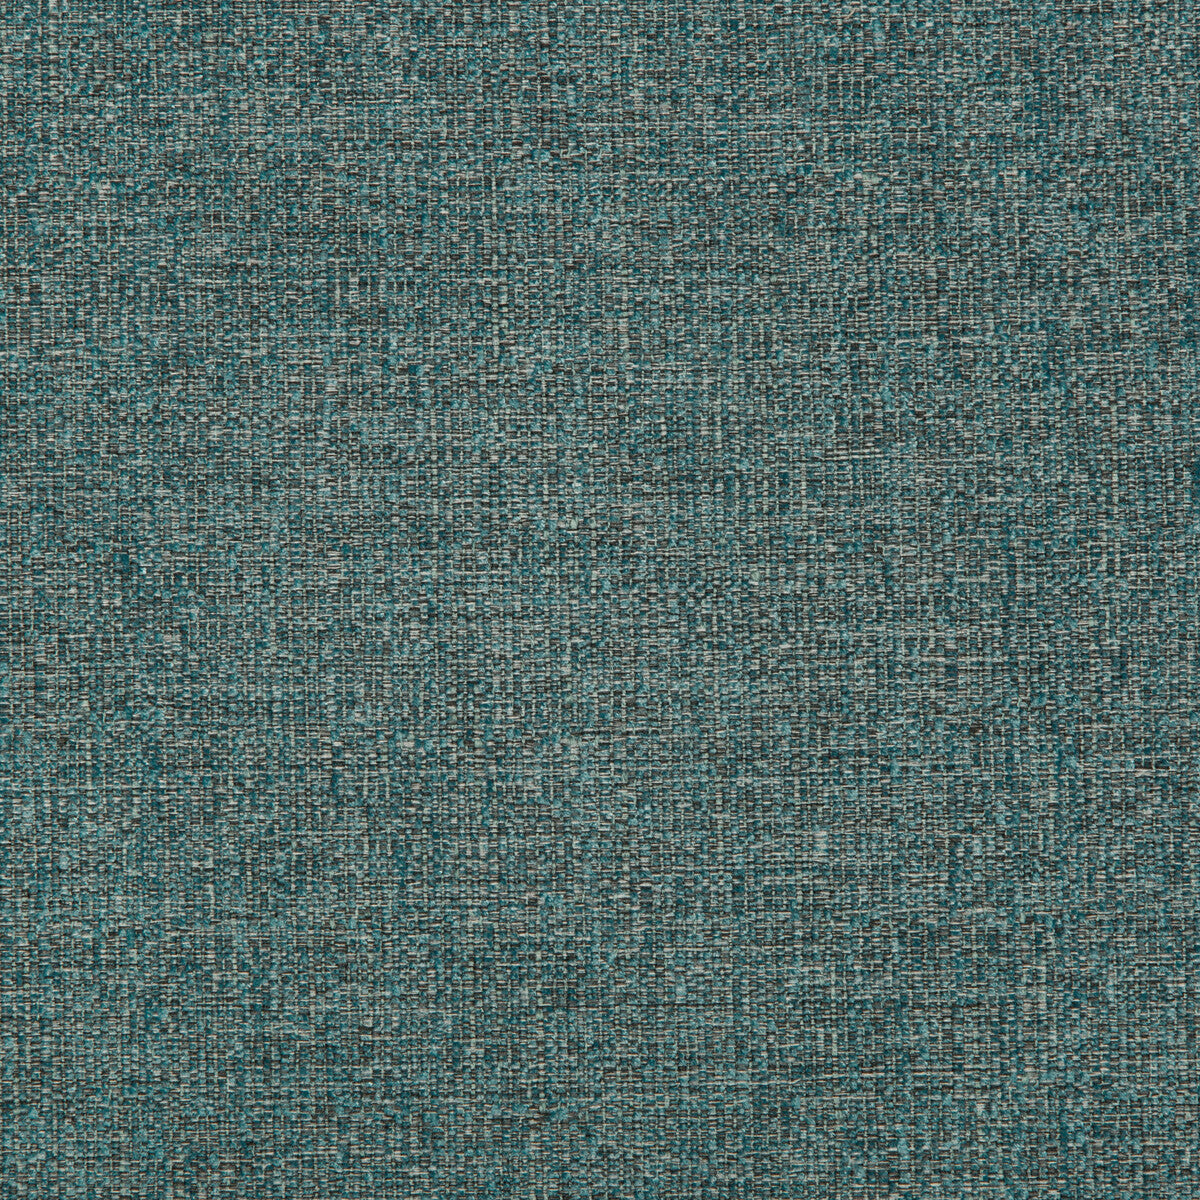 Kravet Contract fabric in 35479-35 color - pattern 35479.35.0 - by Kravet Contract